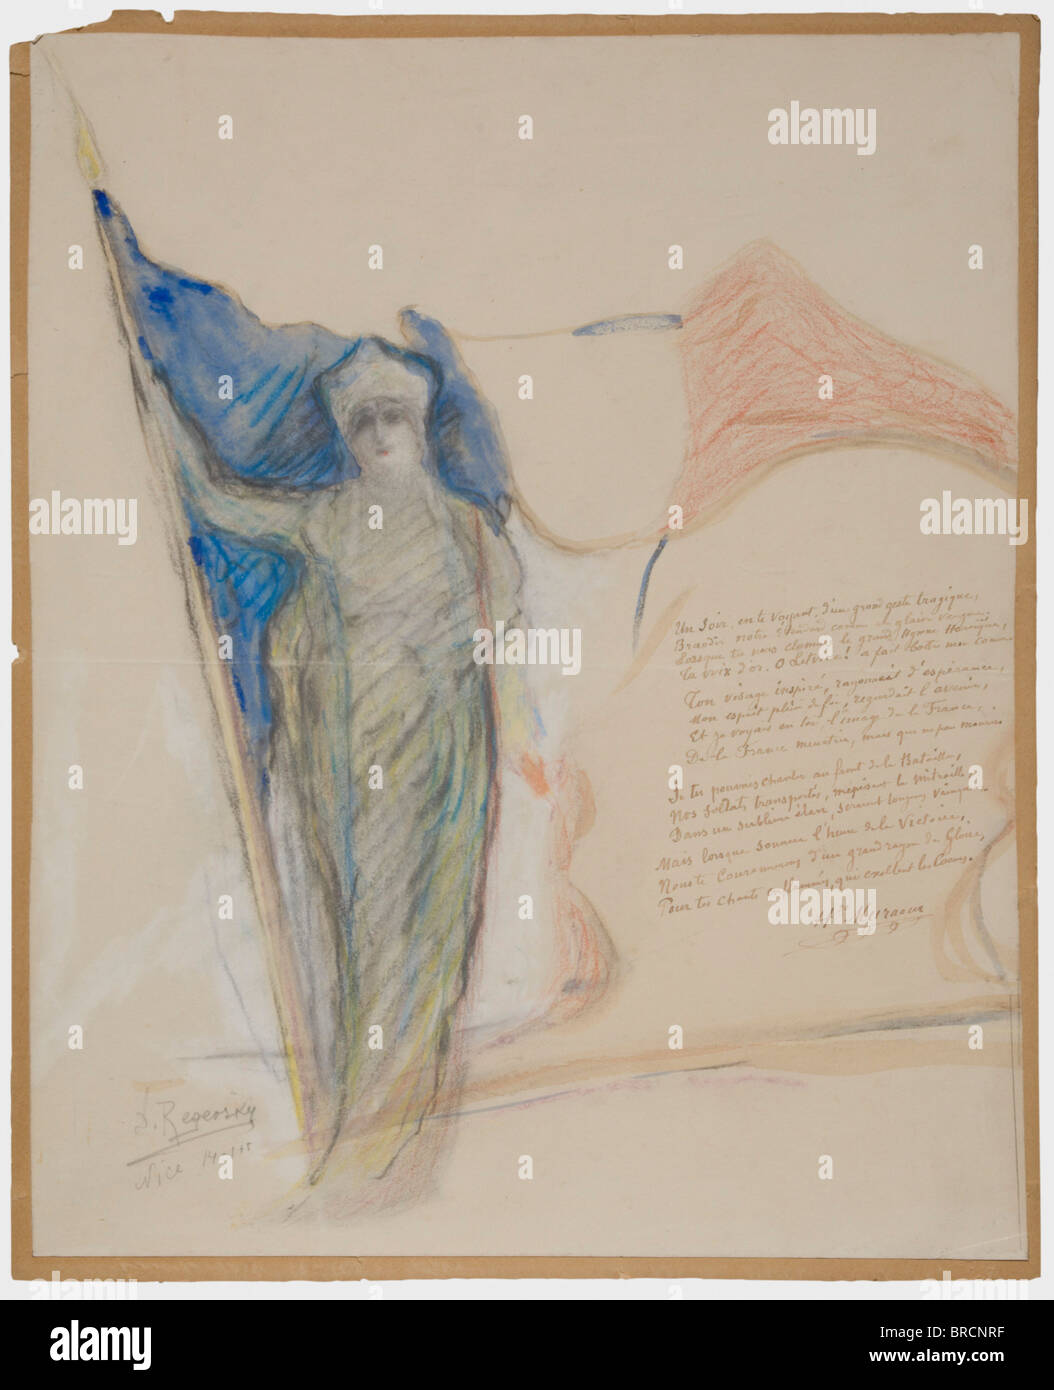 Félia Litvinne (1860 - 1936), a portrait as 'Marianne' Pastel on paper and cardboard, signed and dated on lower left 'D. Regevsky 1914', on the right edge a sonnet expressing the hope that Litvinne will sing for the French soldiers at the front, signed 'H.re Muraour'. Size ca. 45.5 cm x 37.5 cm. fine arts, people, 1910s, 20th century, object, objects, stills, clipping, clippings, cut out, cut-out, cut-outs, utensil, piece of equipment, utensils, item, items, Artist's Copyright has not to be cleared Stock Photo